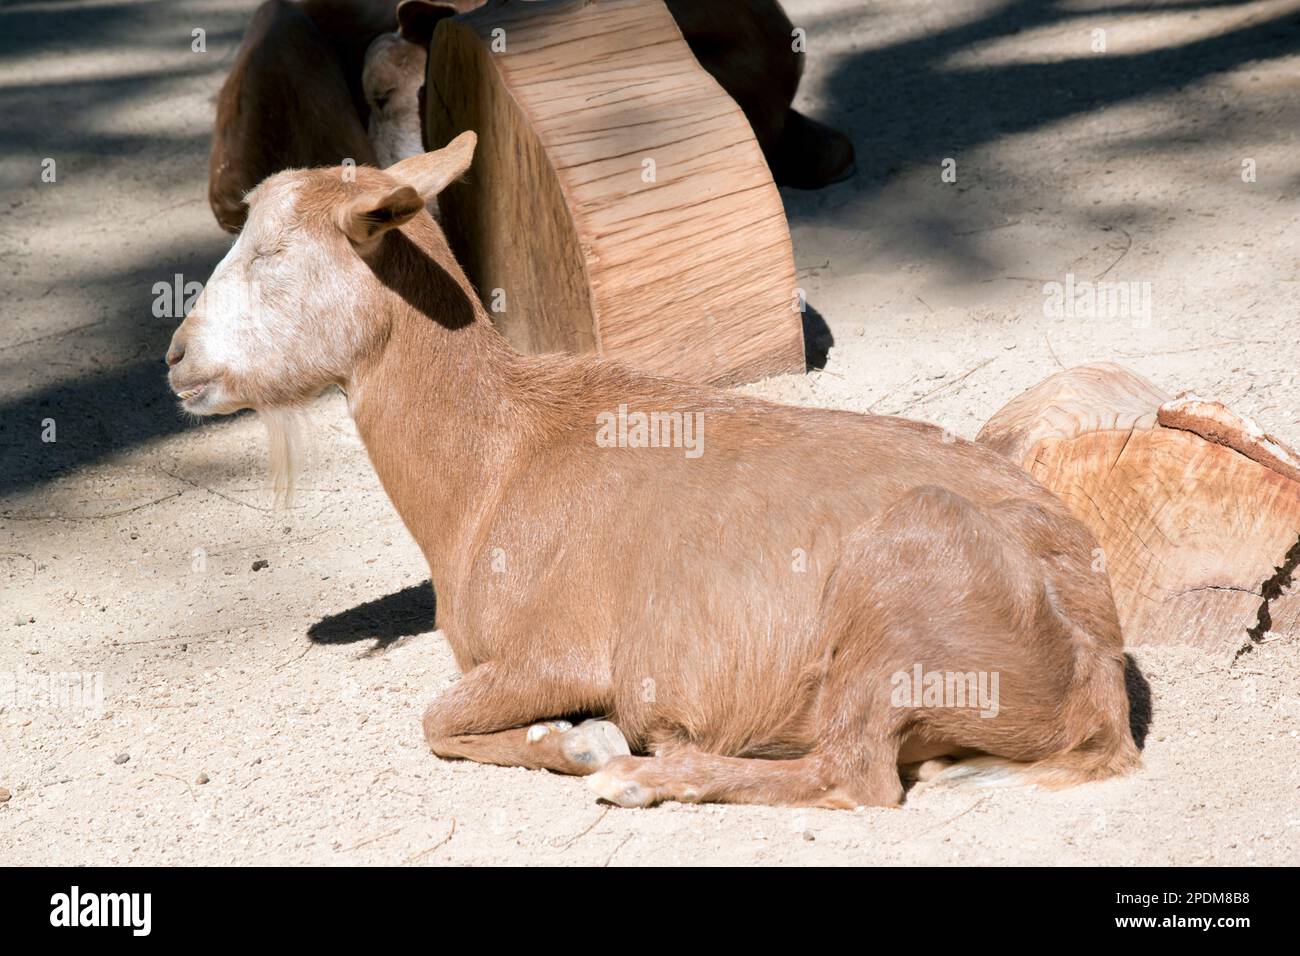 the goat  has horns that arch backward, a short tail, and straighter hair. Male goats, called bucks or billys, usually have a beard. Stock Photo